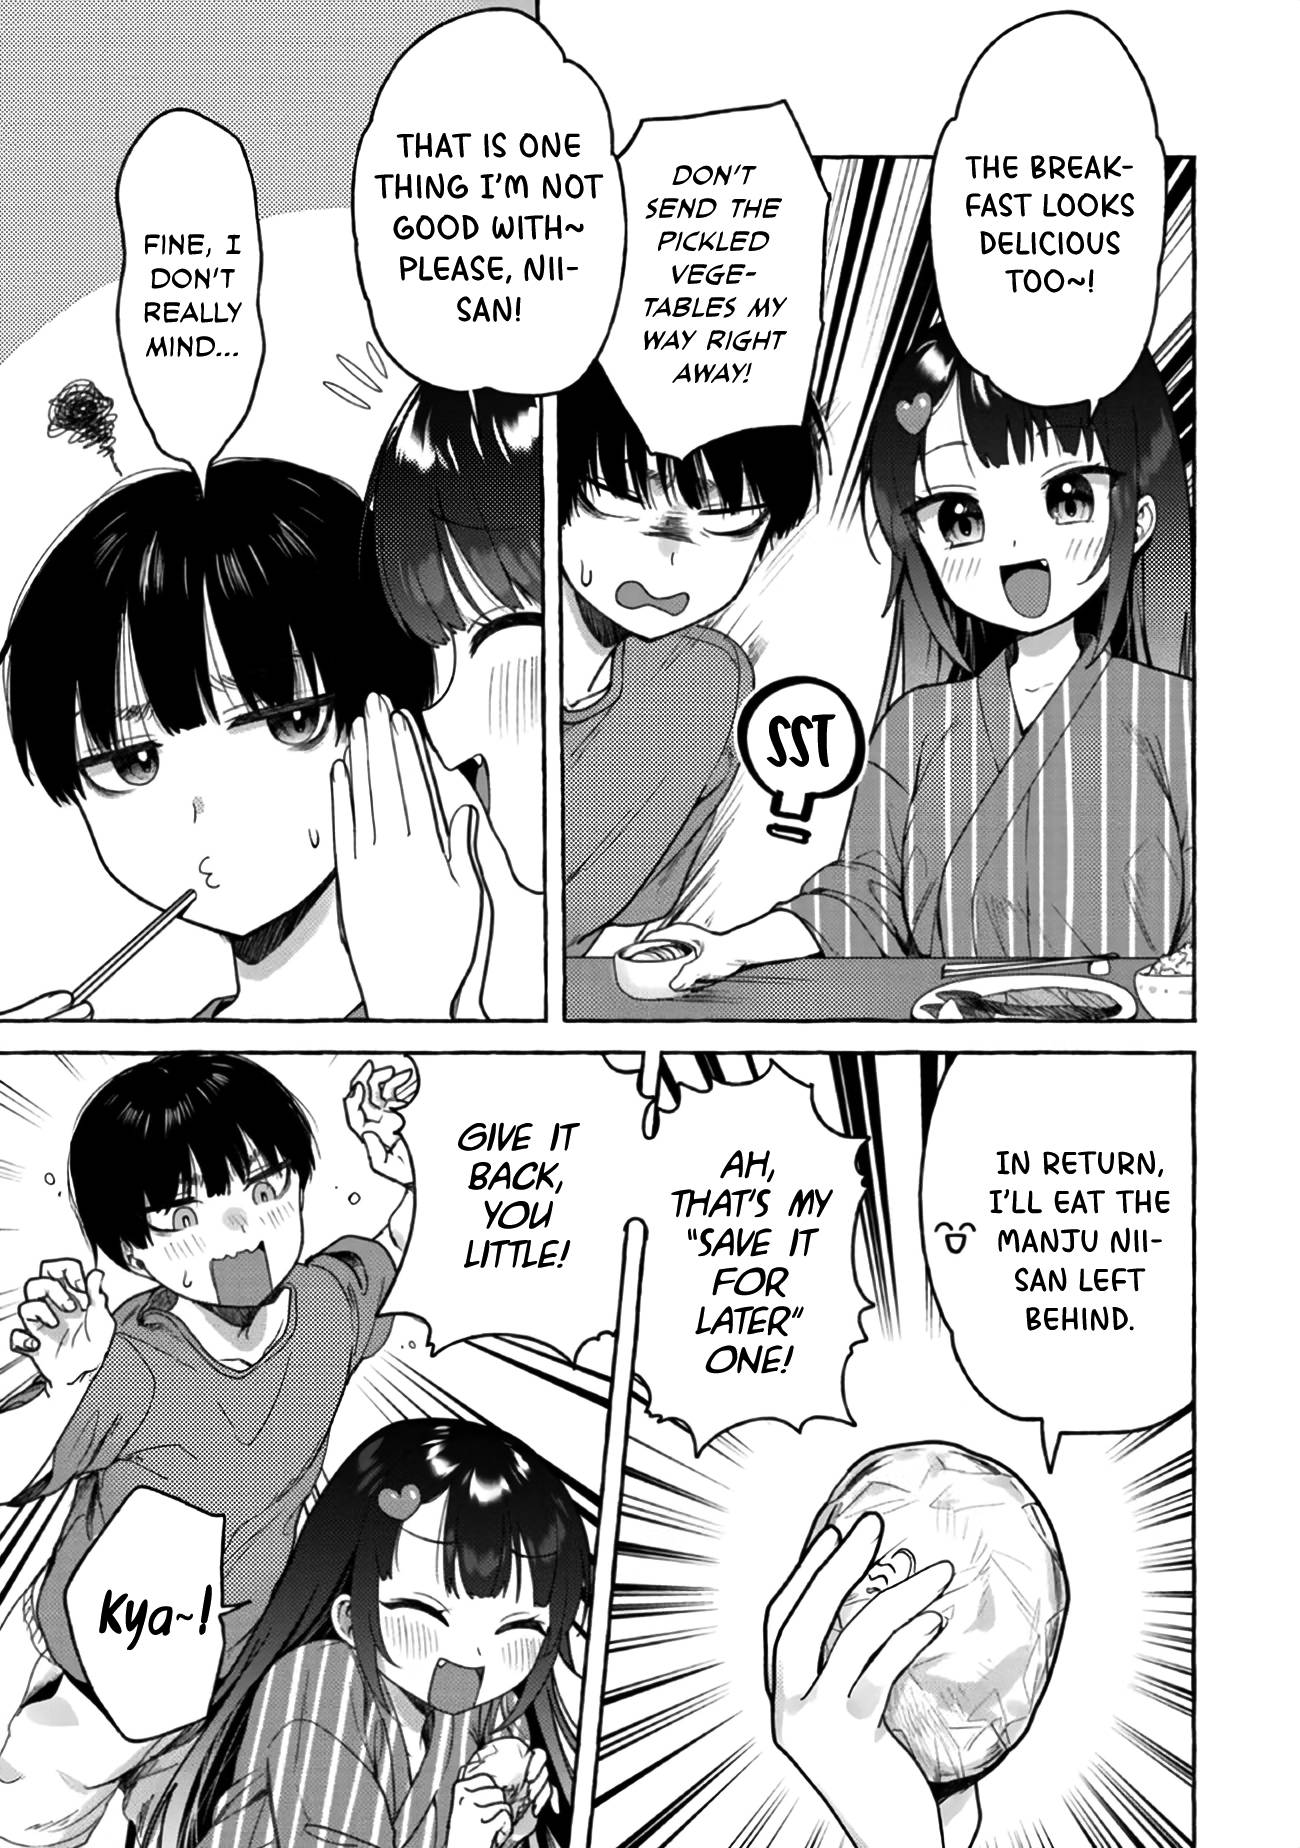 Read Im Sandwiched Between Sweet And Spicy Step Sisters Manga English New Chapters Online 8105